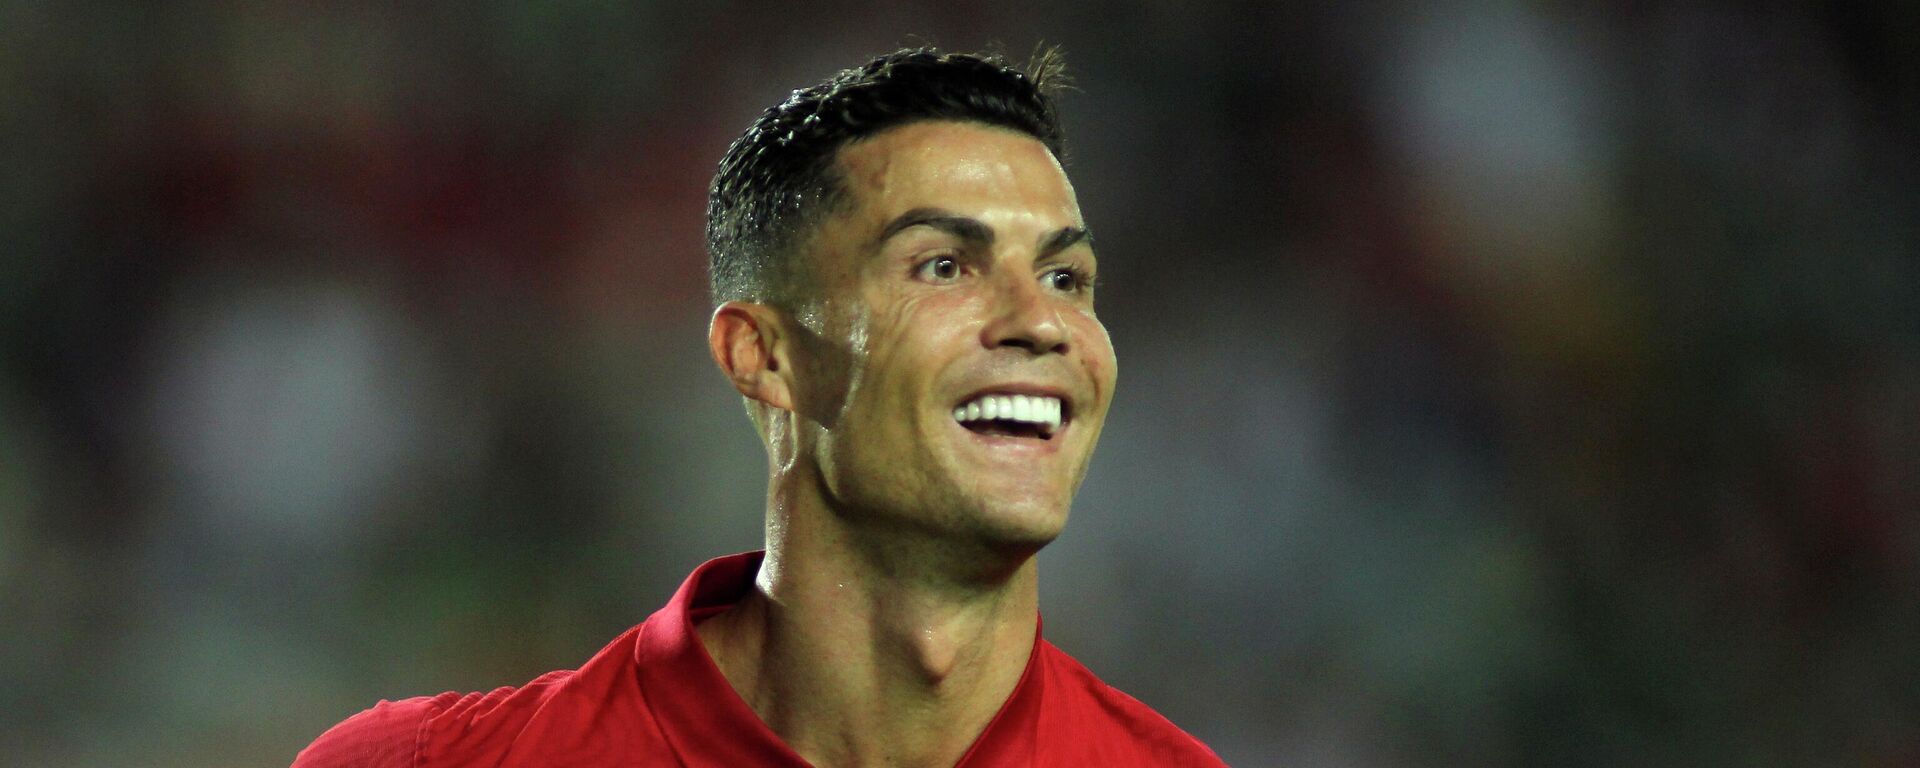 Portugal's Cristiano Ronaldo smiles after scoring the opening goal during the international friendly soccer match between Portugal and Qatar at the Algarve stadium outside Faro, Portugal, Saturday, Oct. 9, 2021 - Sputnik International, 1920, 24.06.2022